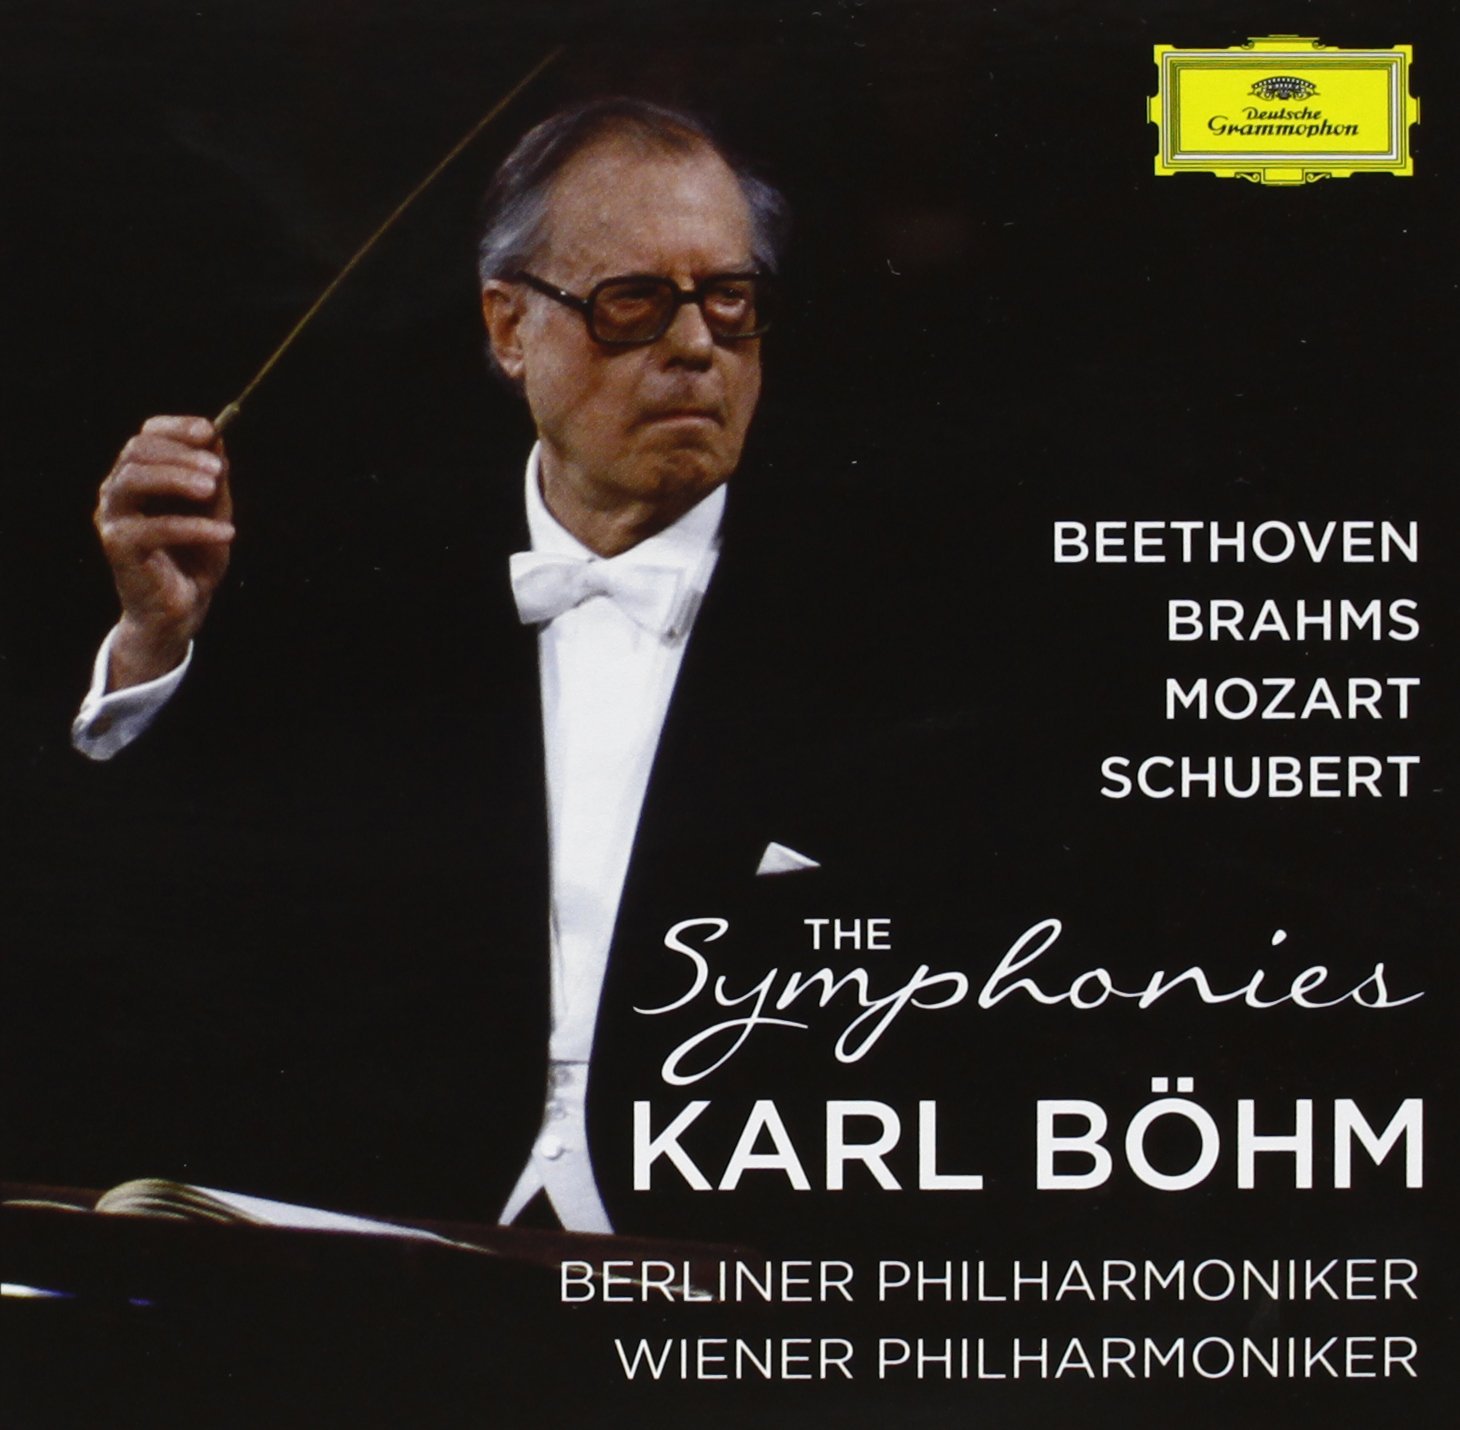 Classical music resources: Karl bohm Conducts Beethoven,Brahms,Schubert ...